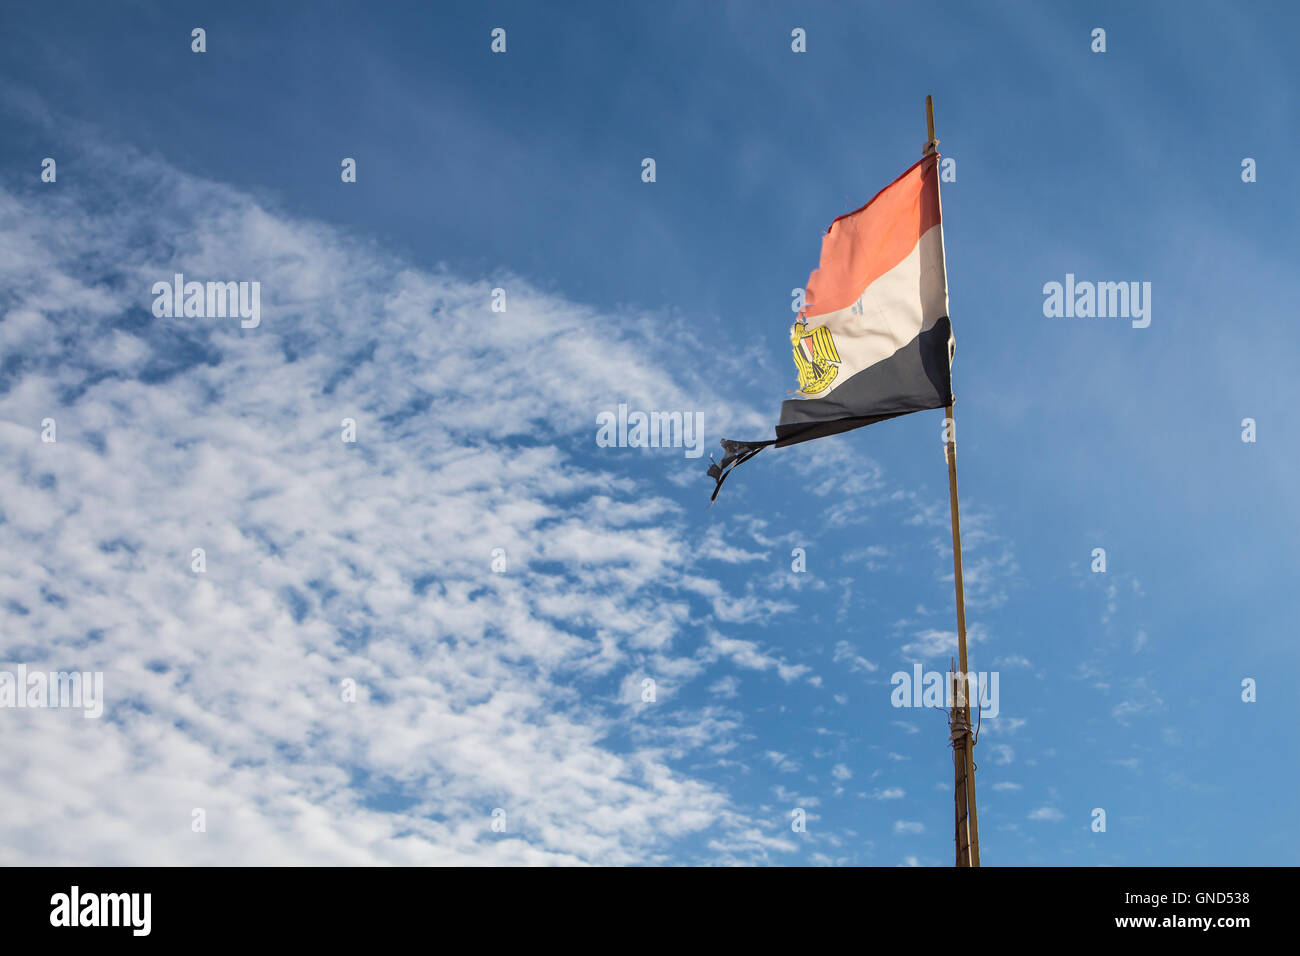 Ragged egyptian flag in the wind, enlightened by sunlight. Blue sky with intense white clouds on the left side. Stock Photo